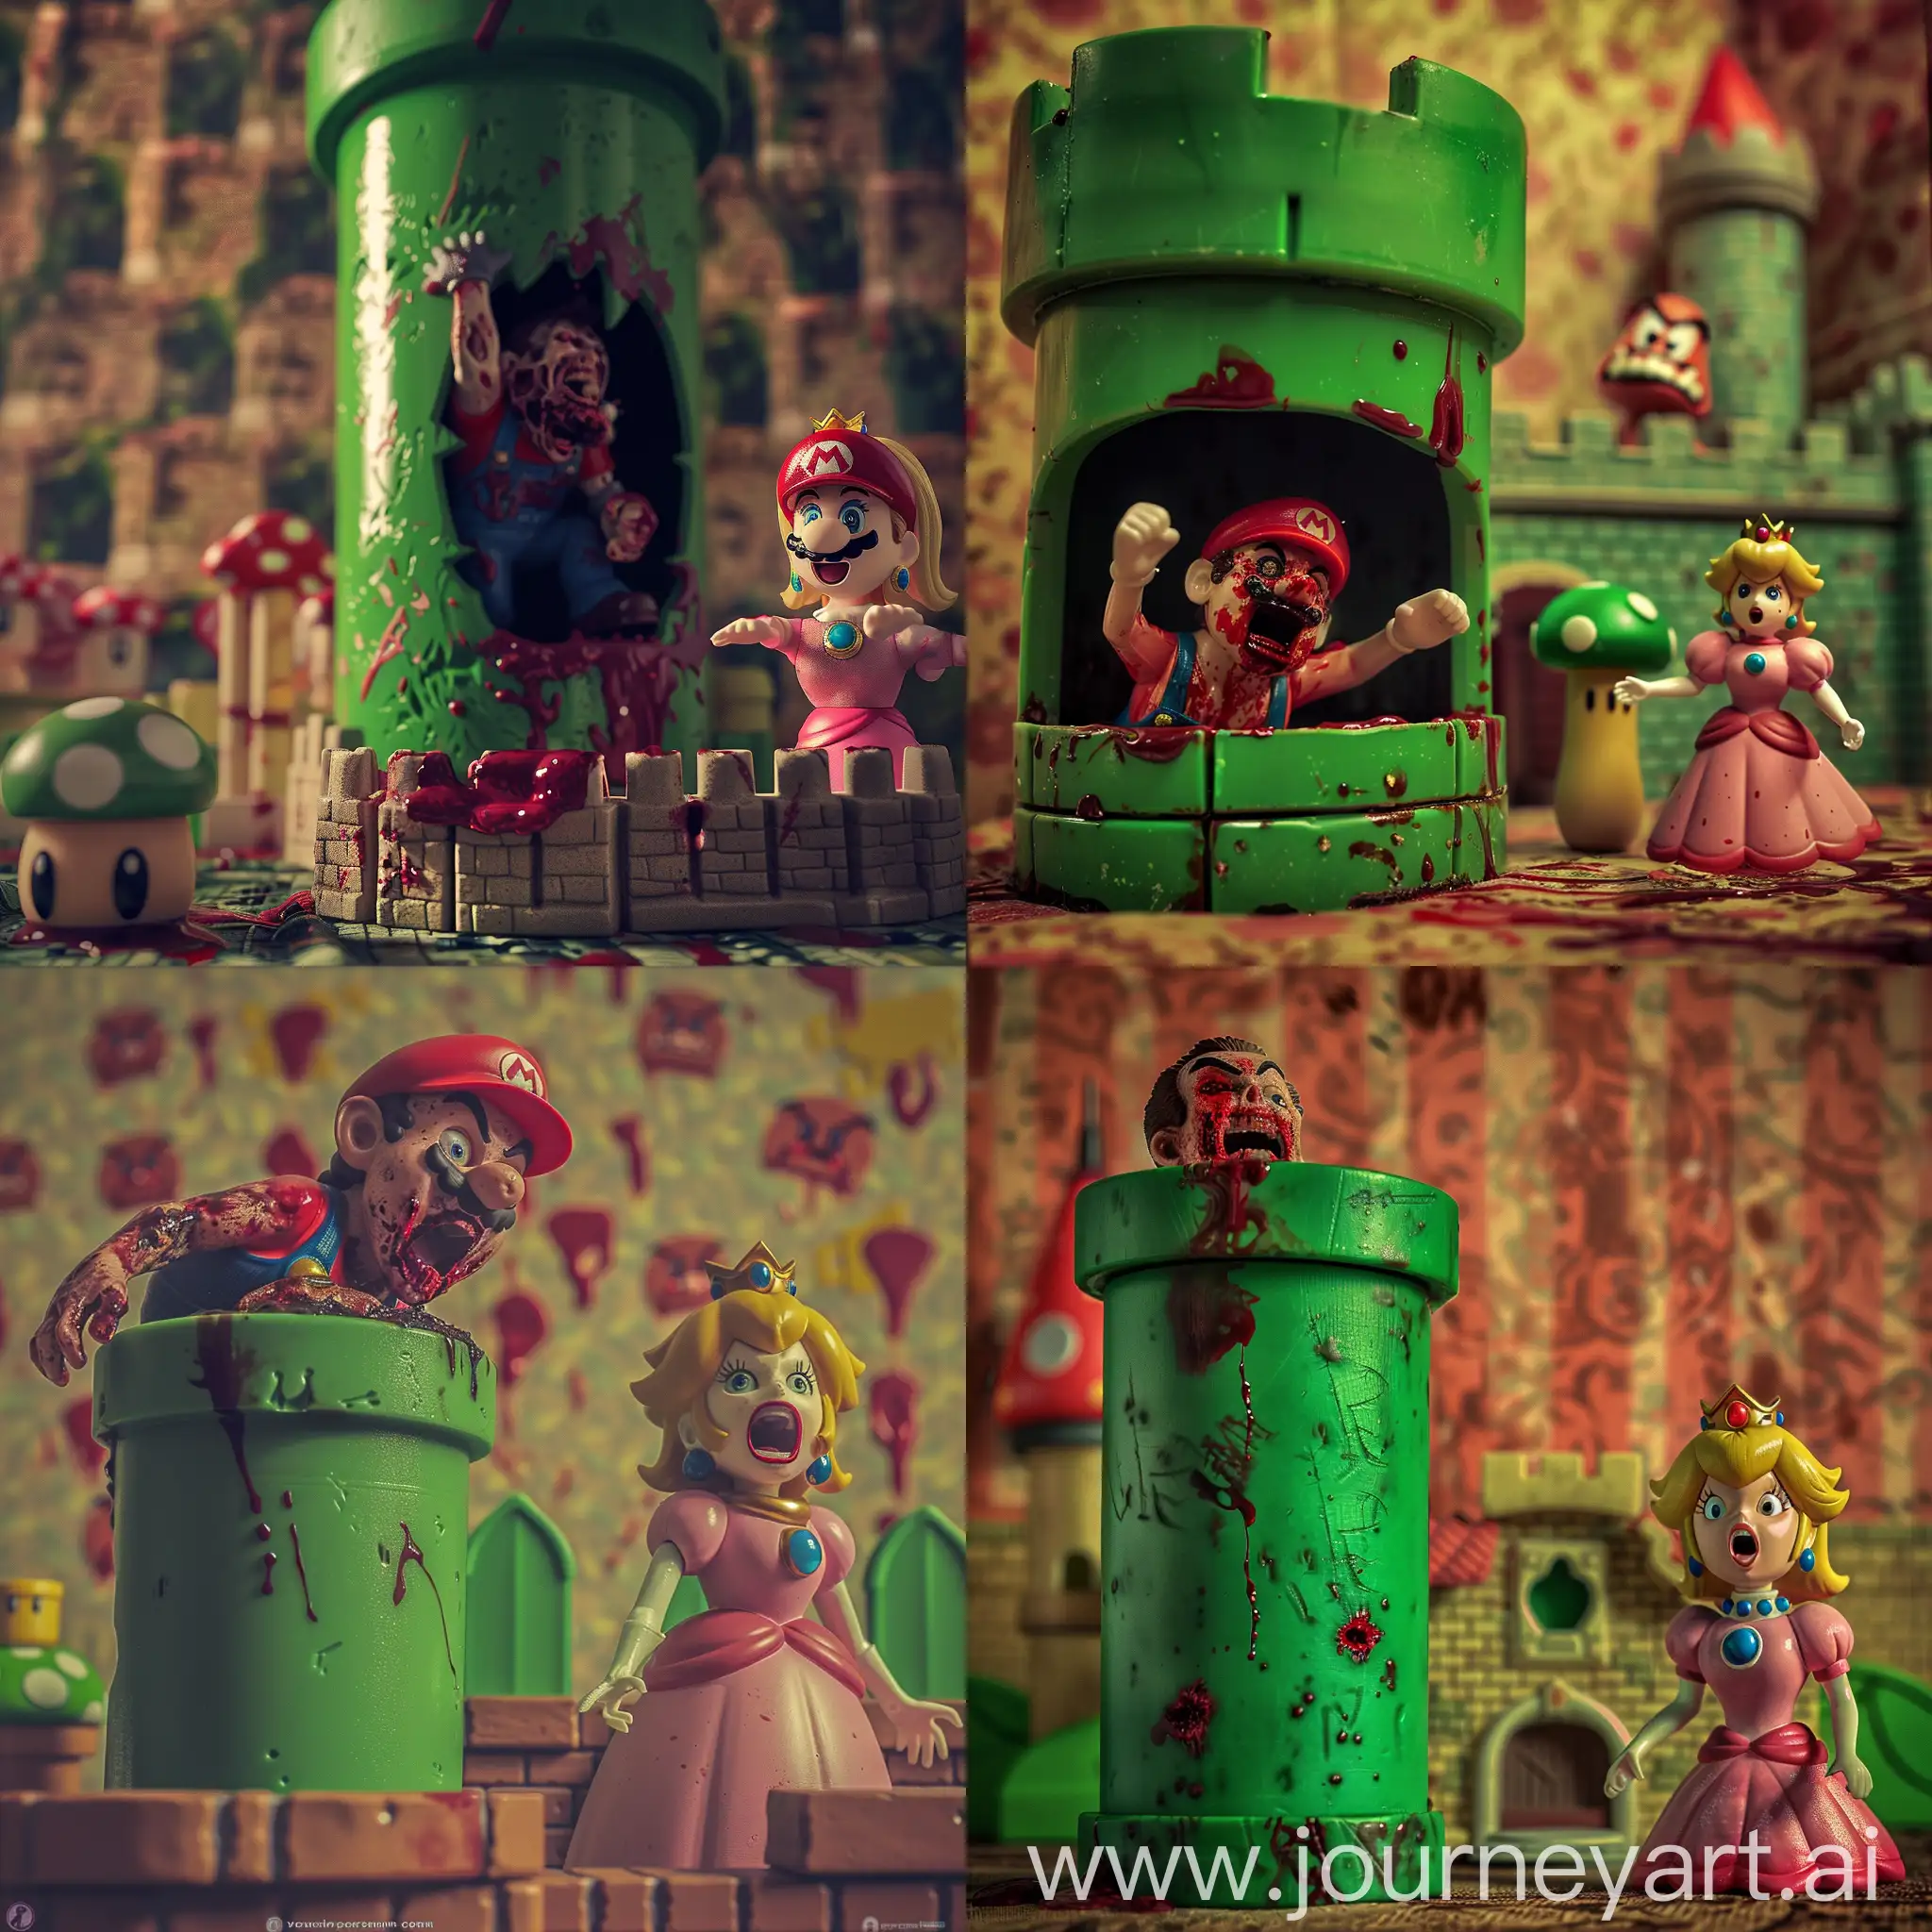 Zombie-Mario-Emerges-from-Bloody-Cylinder-Terrifying-Princess-Peach-in-Toy-Castle